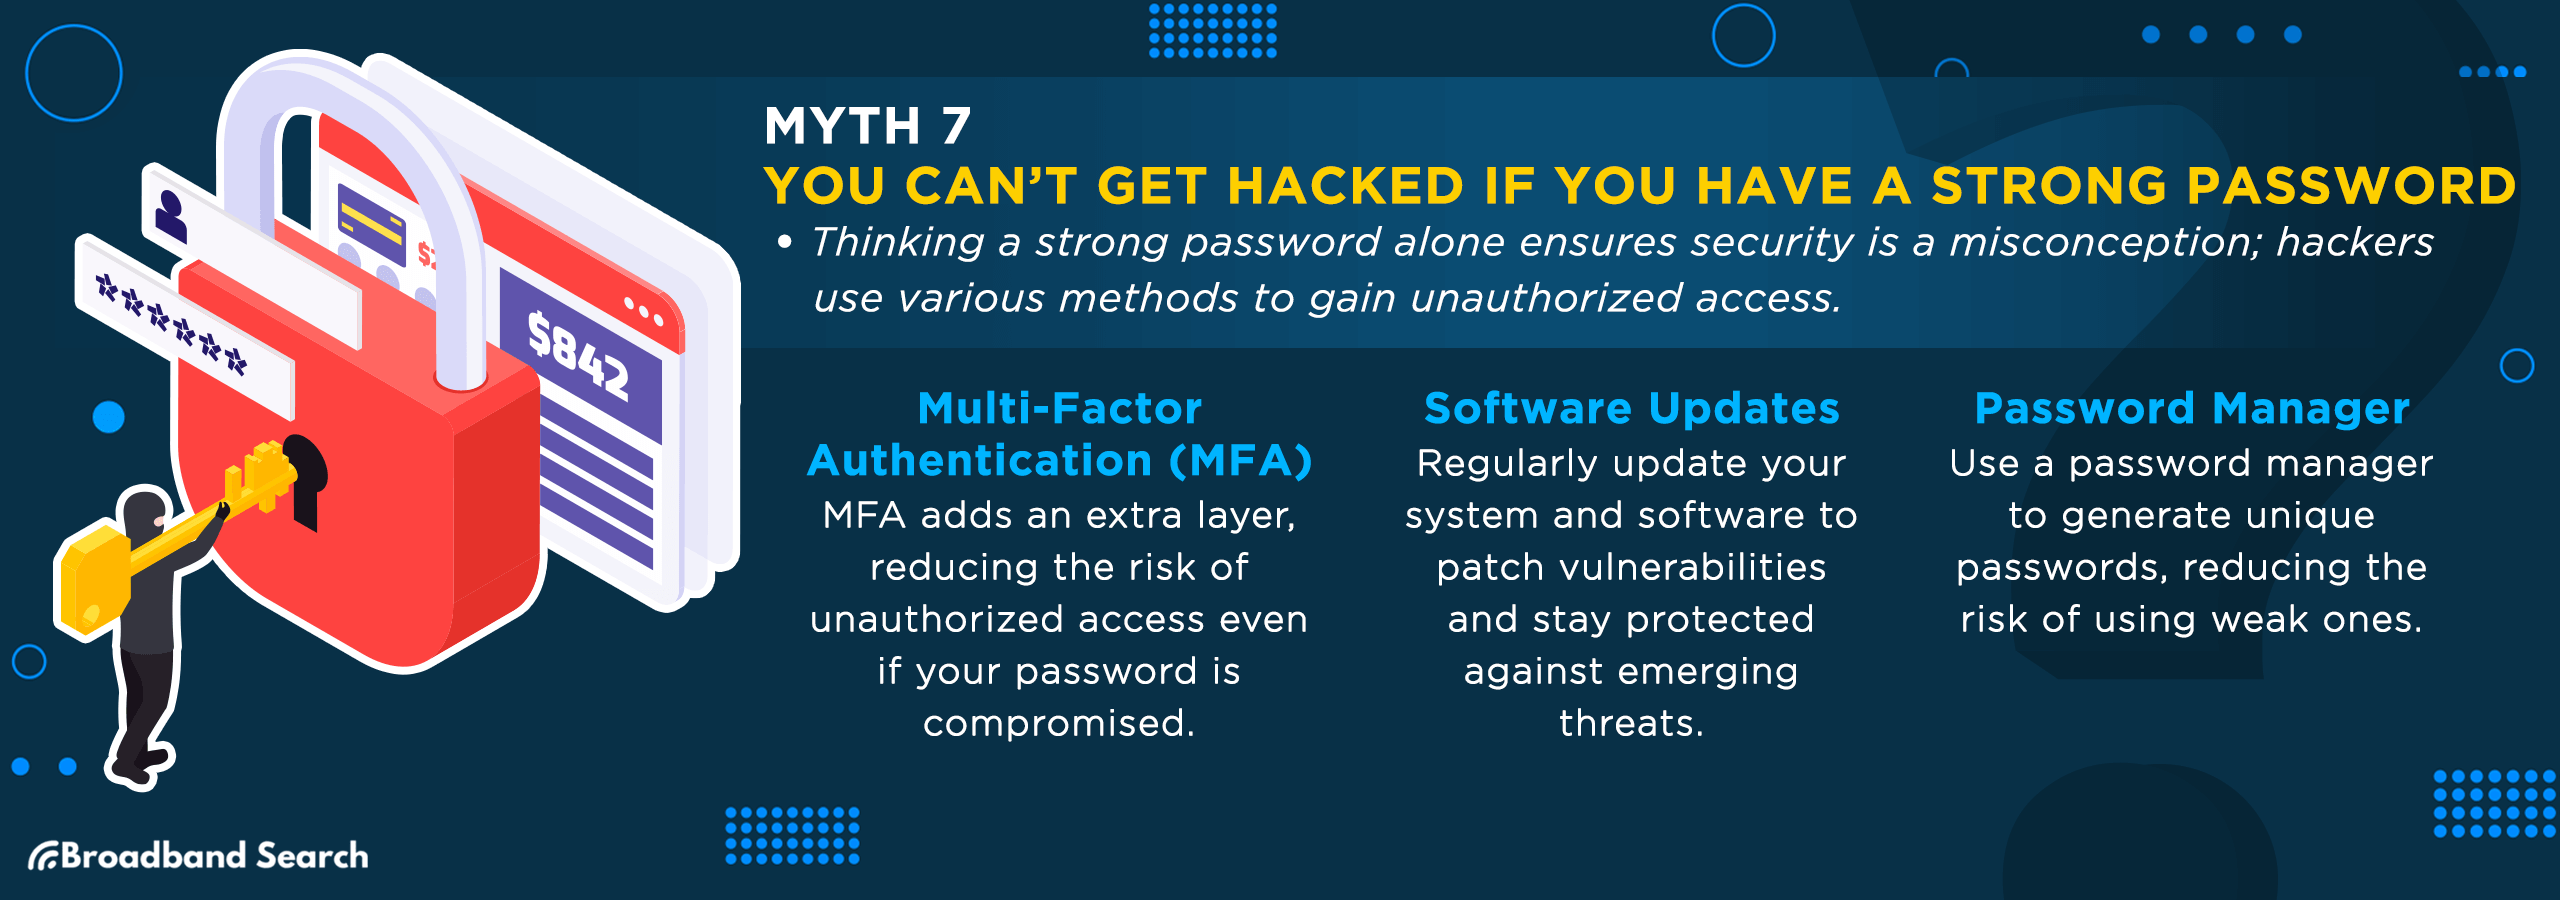 seventh internet myth, you can't get hacked if you have a strong password